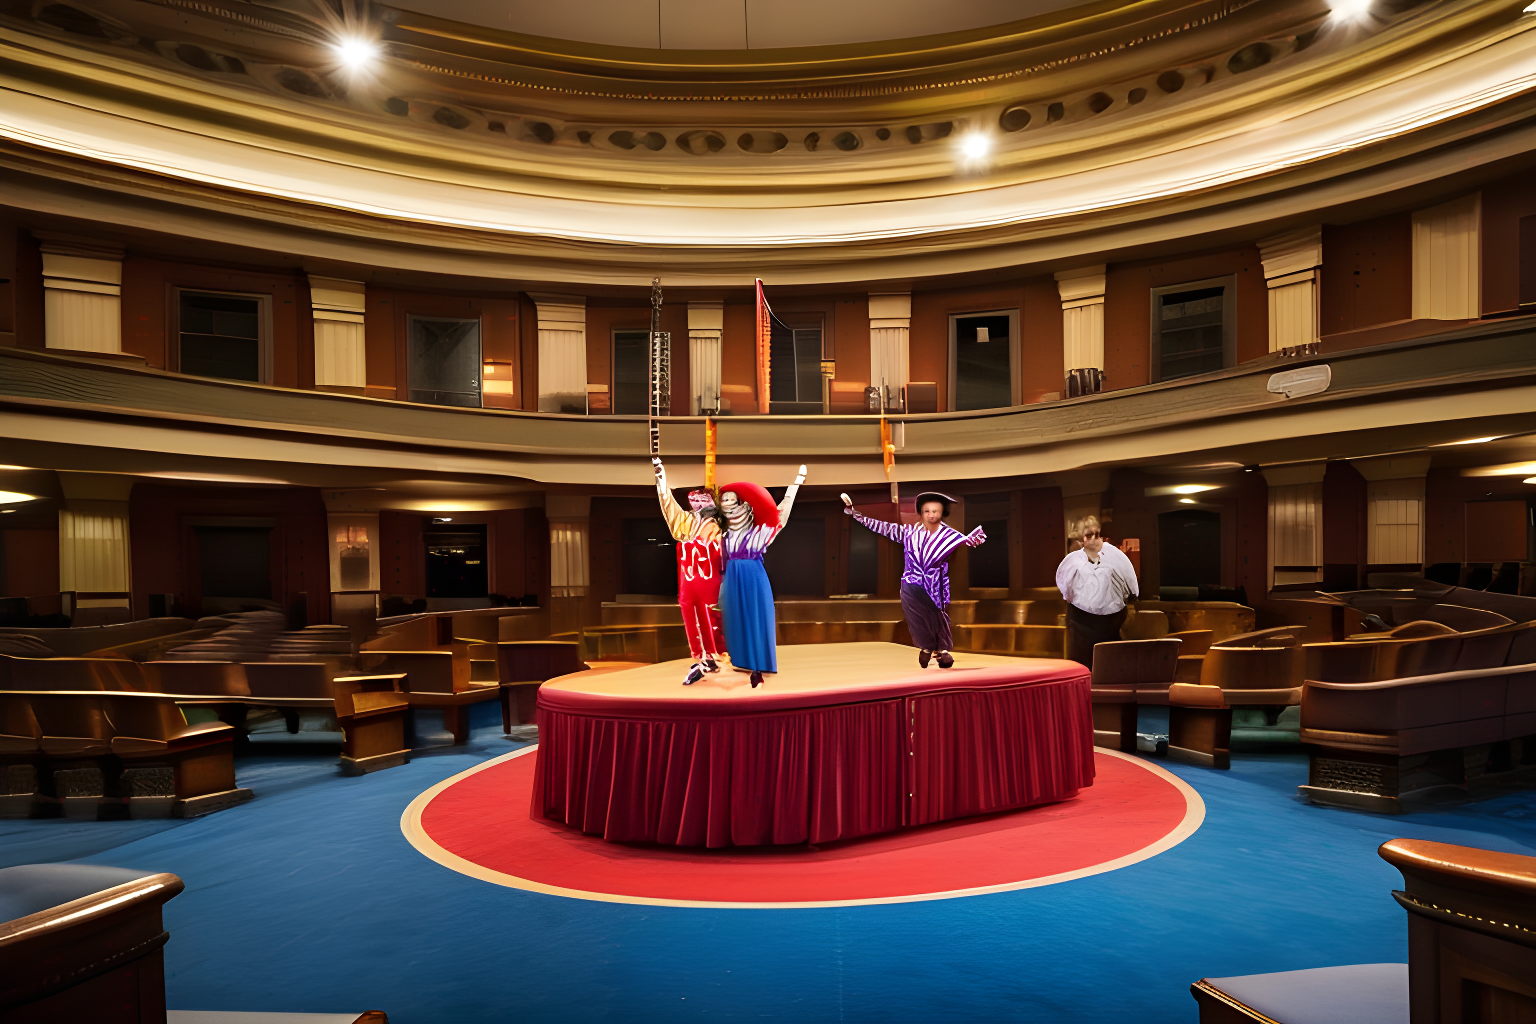 generate a professional photograph of circus acts celebrating in a court room